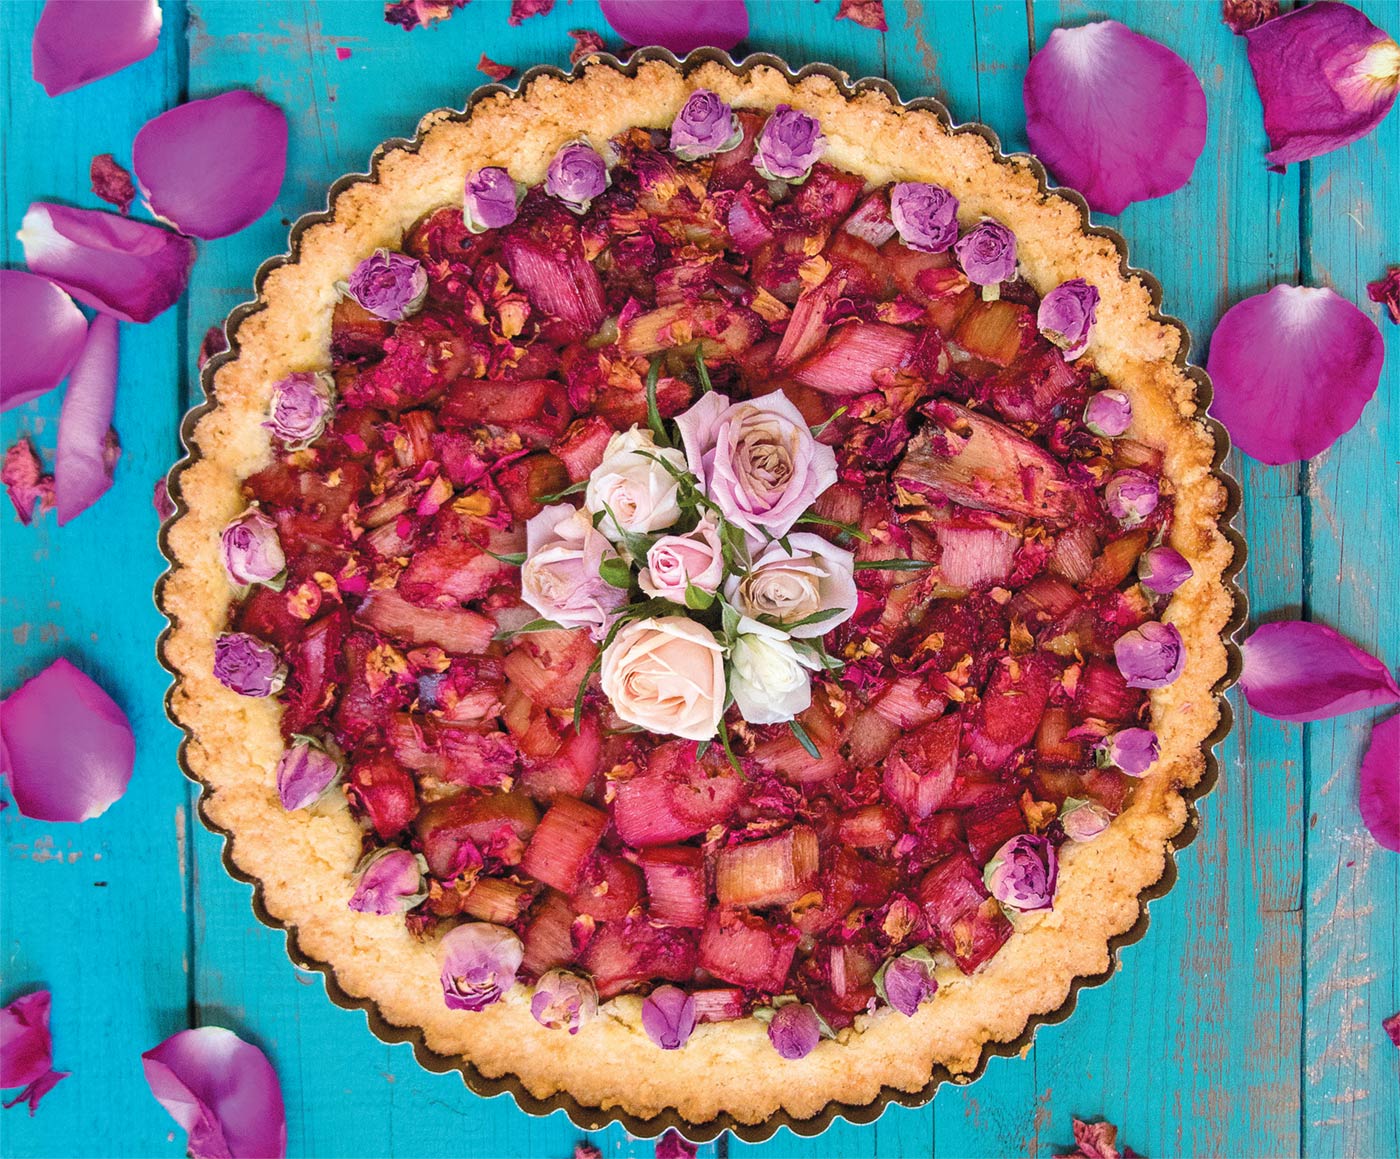 Rhubarb Galette  Edible Silicon Valley